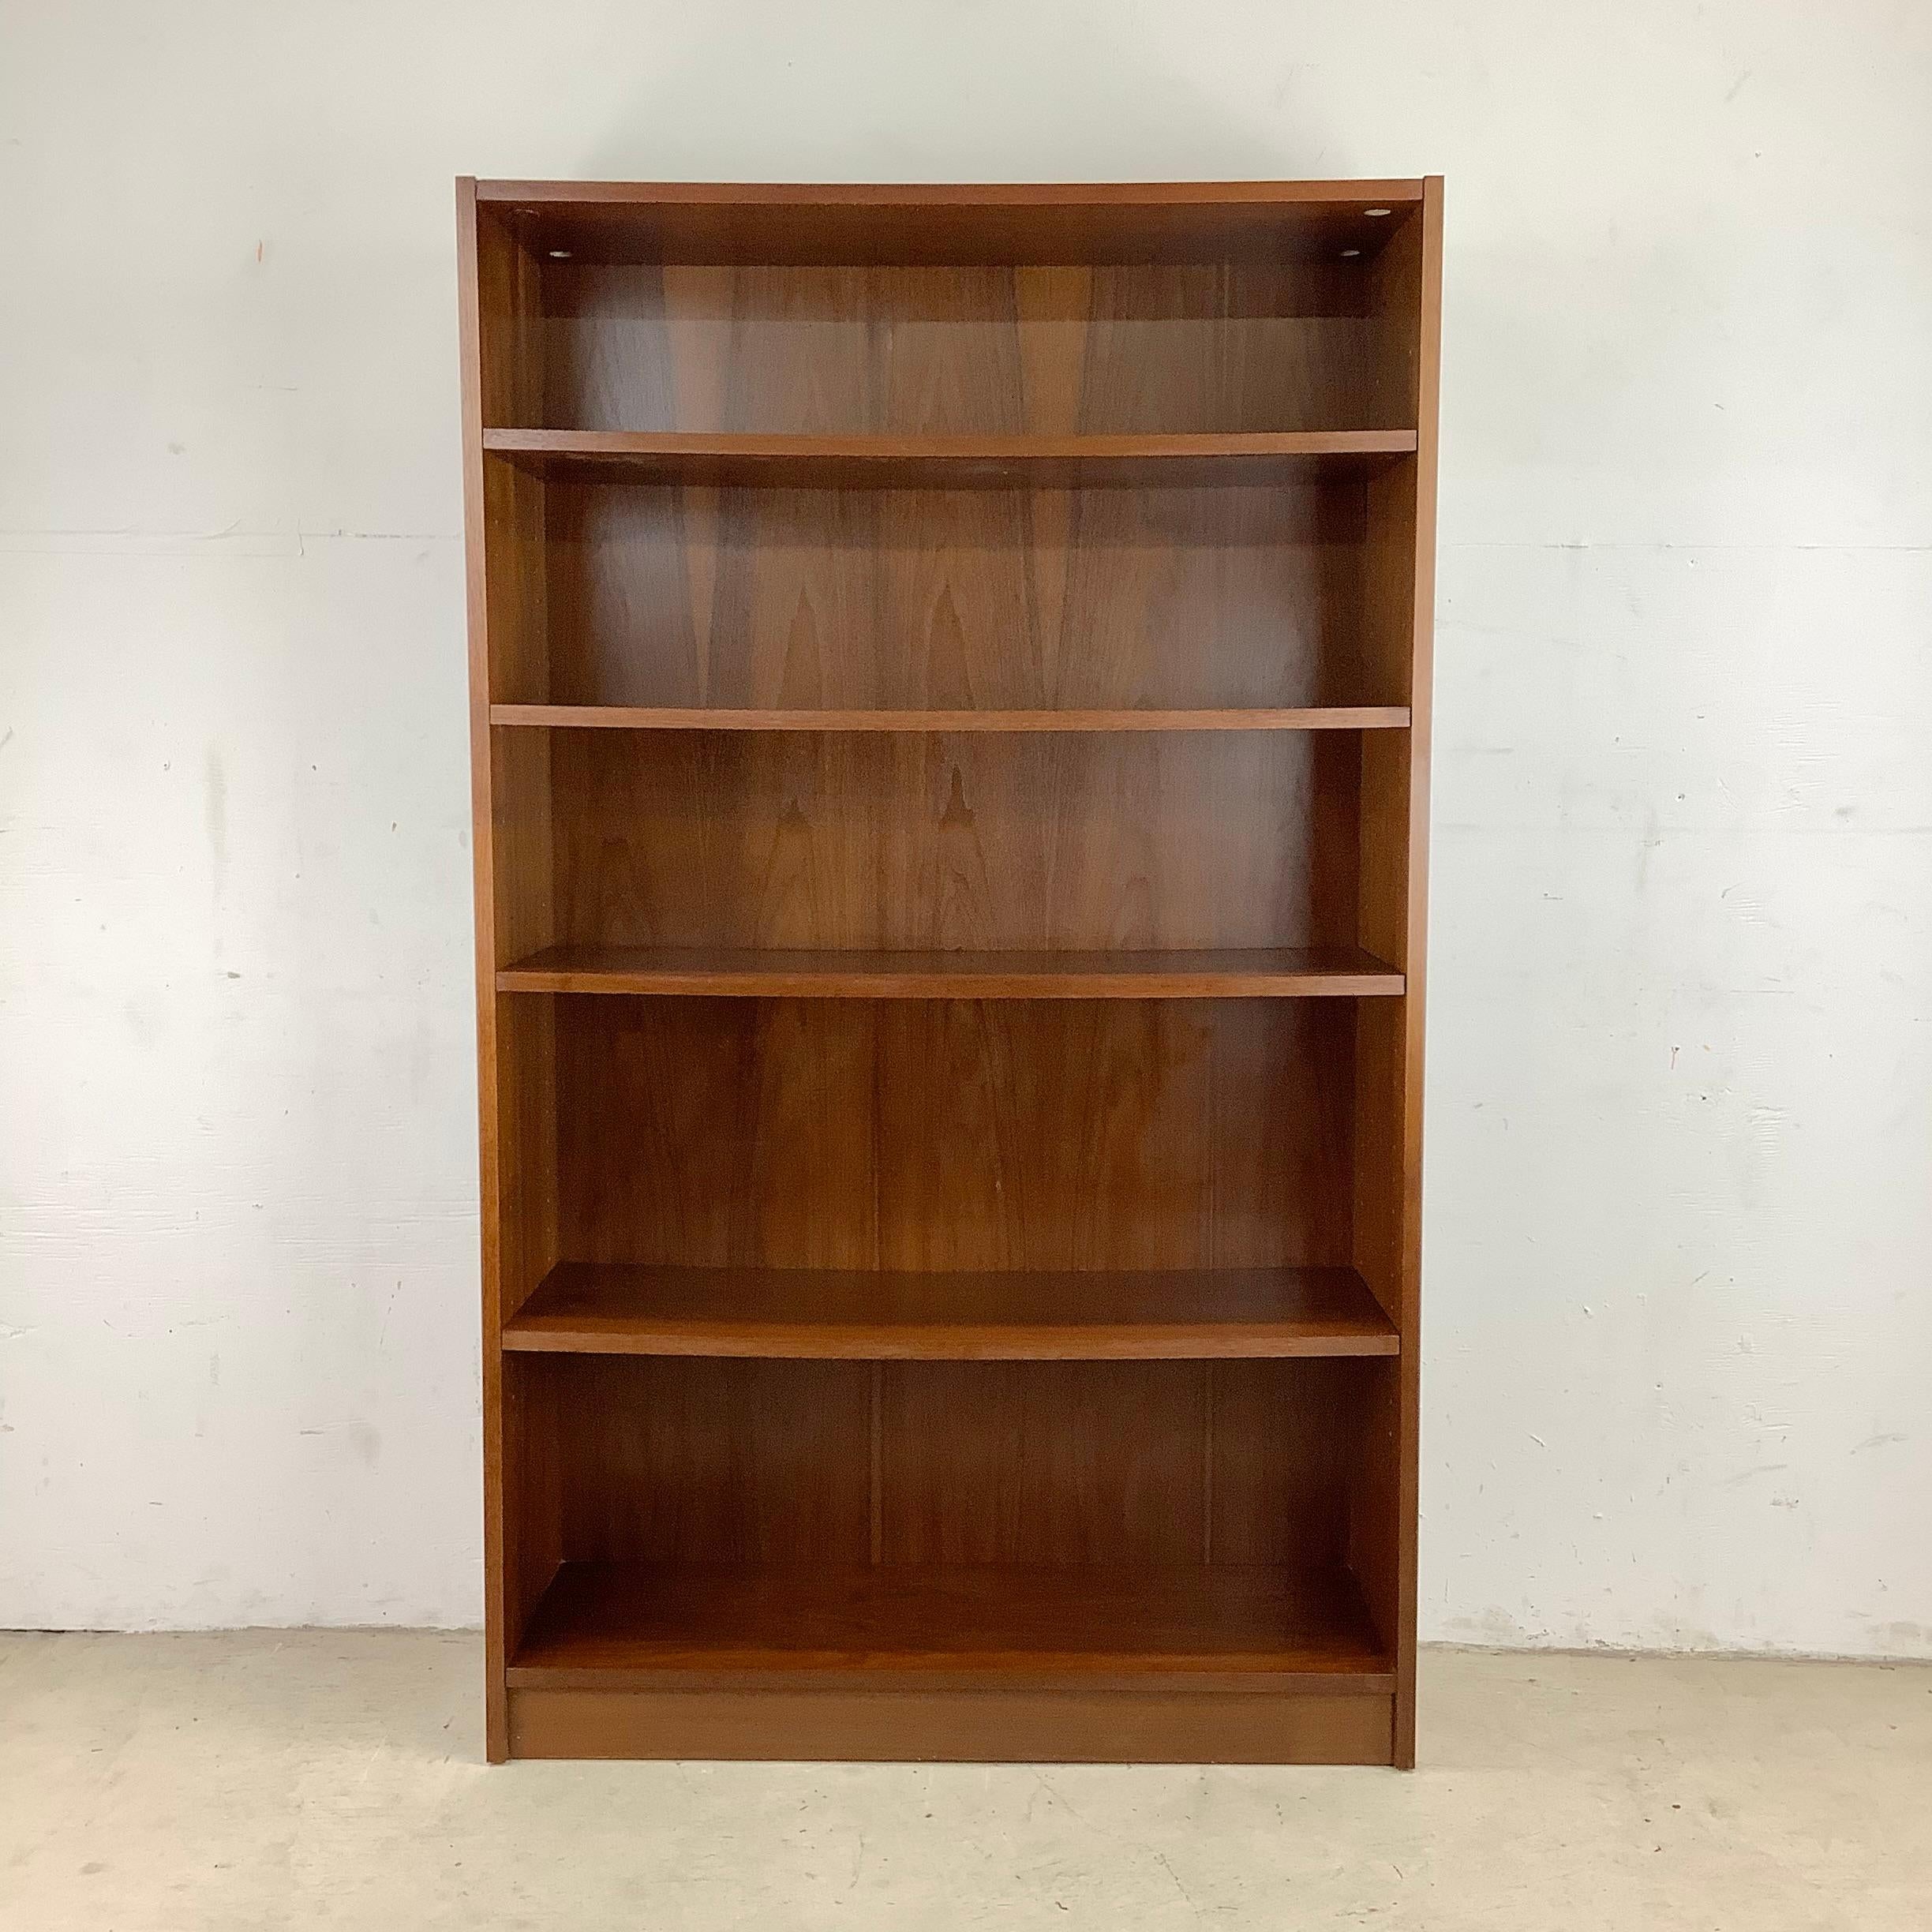 This Vintage Modern Bookcase with Adjustable Shelving combines vintage charm with practical storage solutions. Crafted with careful attention to detail, this bookcase showcases the timeless beauty of natural wood grain. Its rich tones and elegant